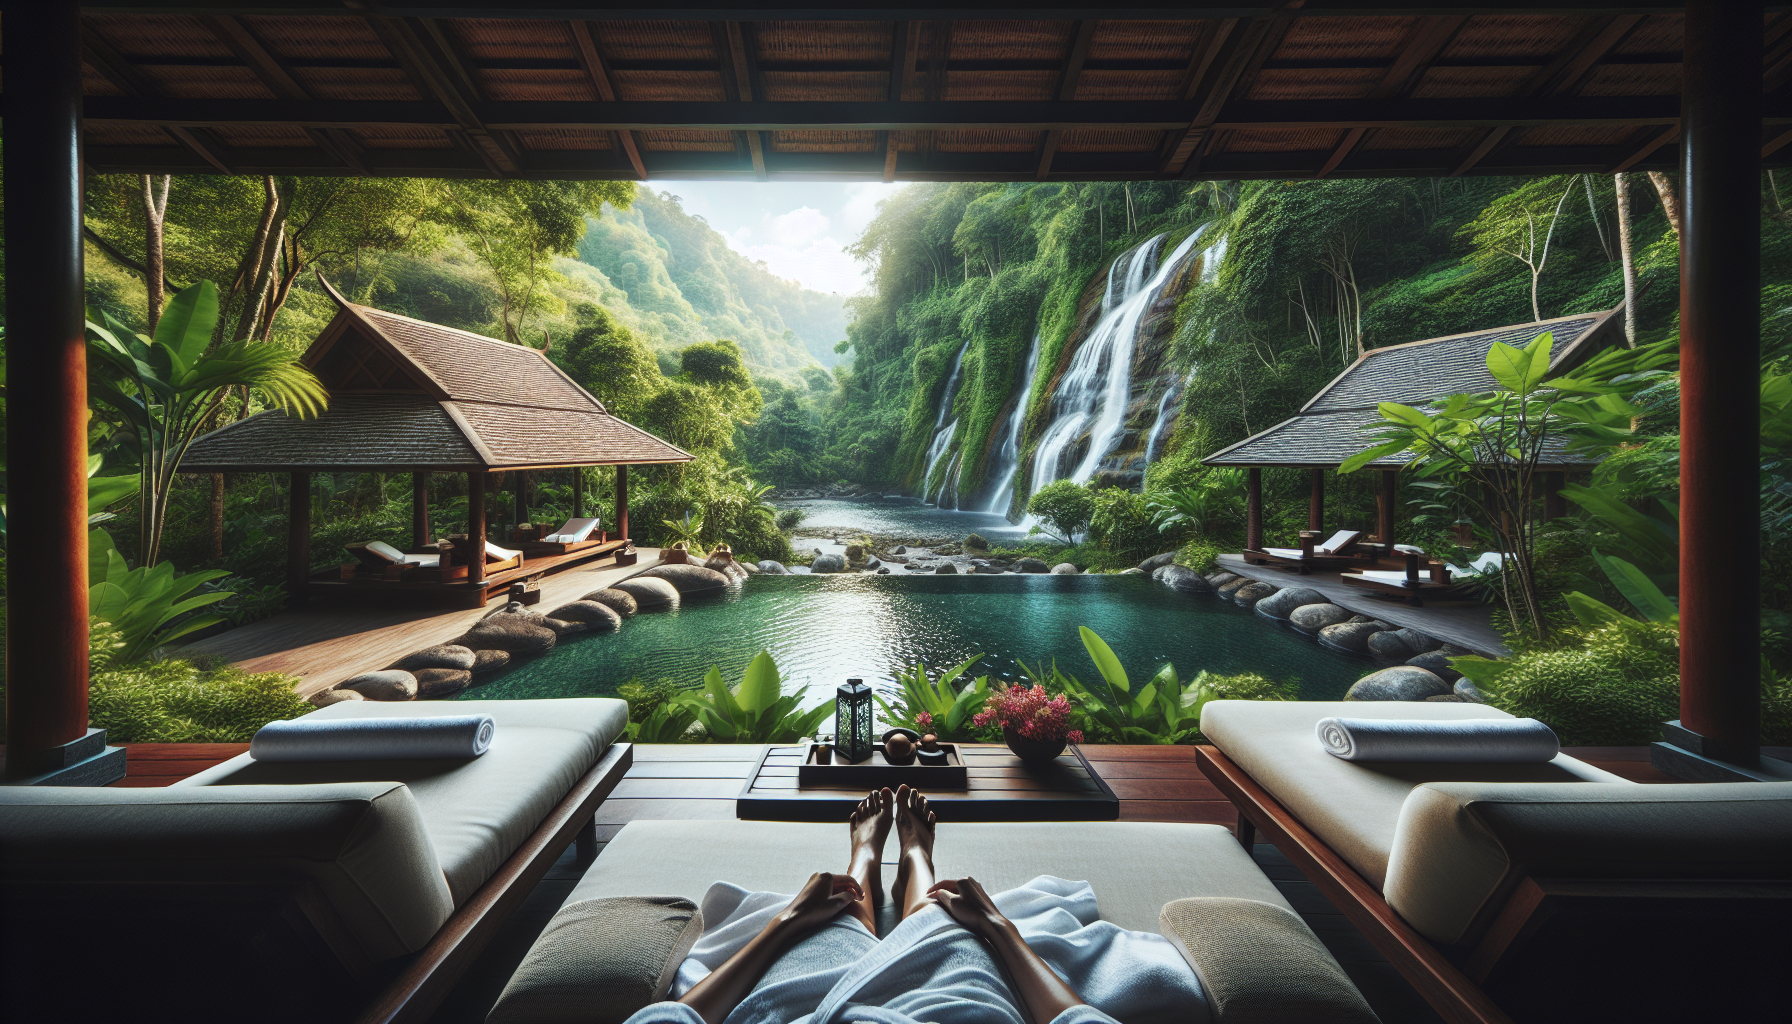 discover if wellness resorts truly provide the ultimate retreat for mind and body with this insightful exploration.